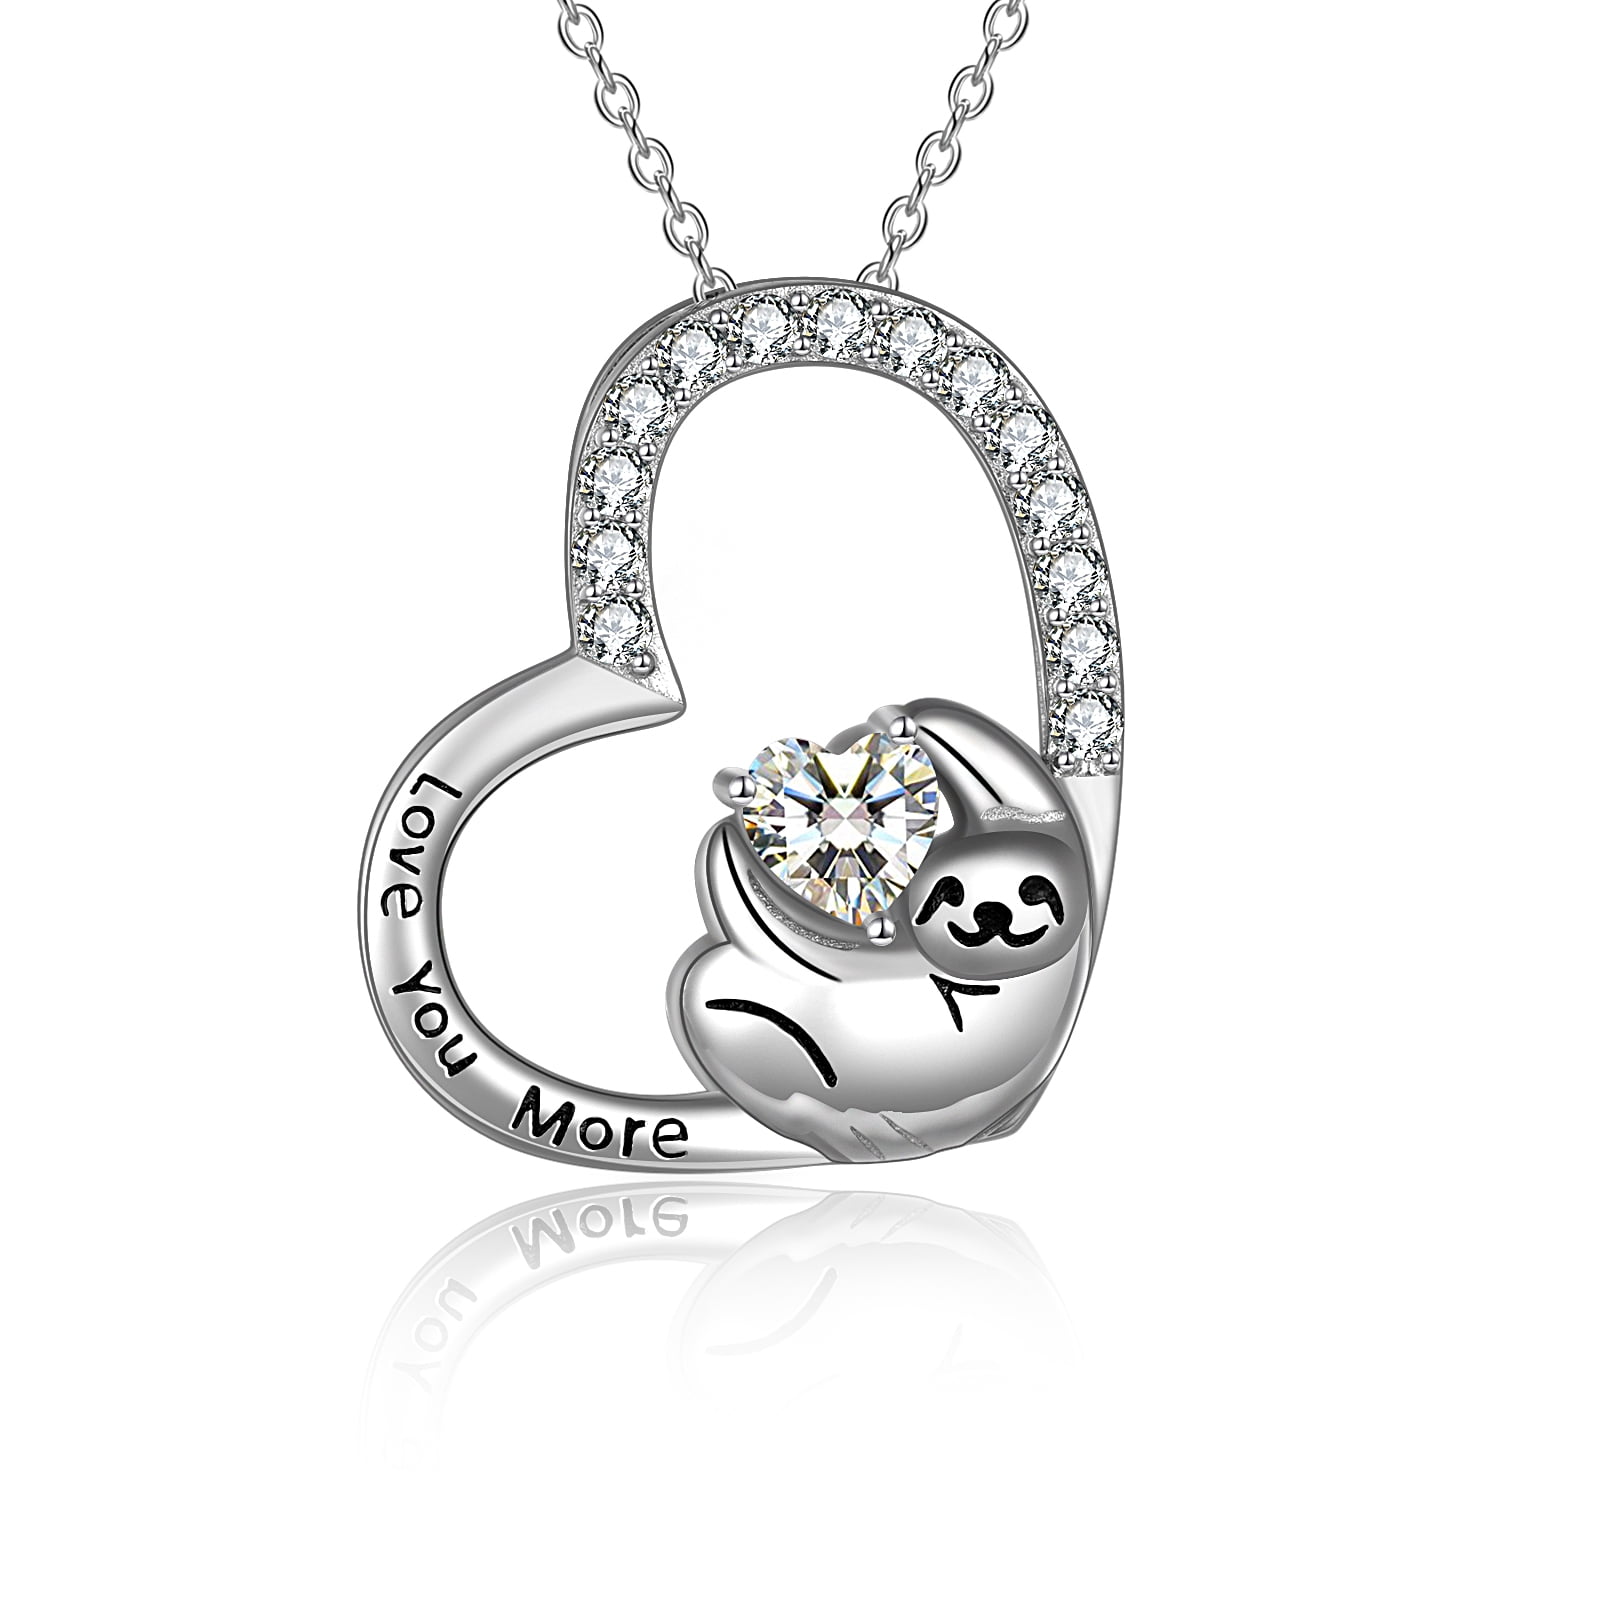 YAFEINI Sloth Gifts Sterling Silver Sloth Necklace Heart Animal Pendant for Women Jewelry